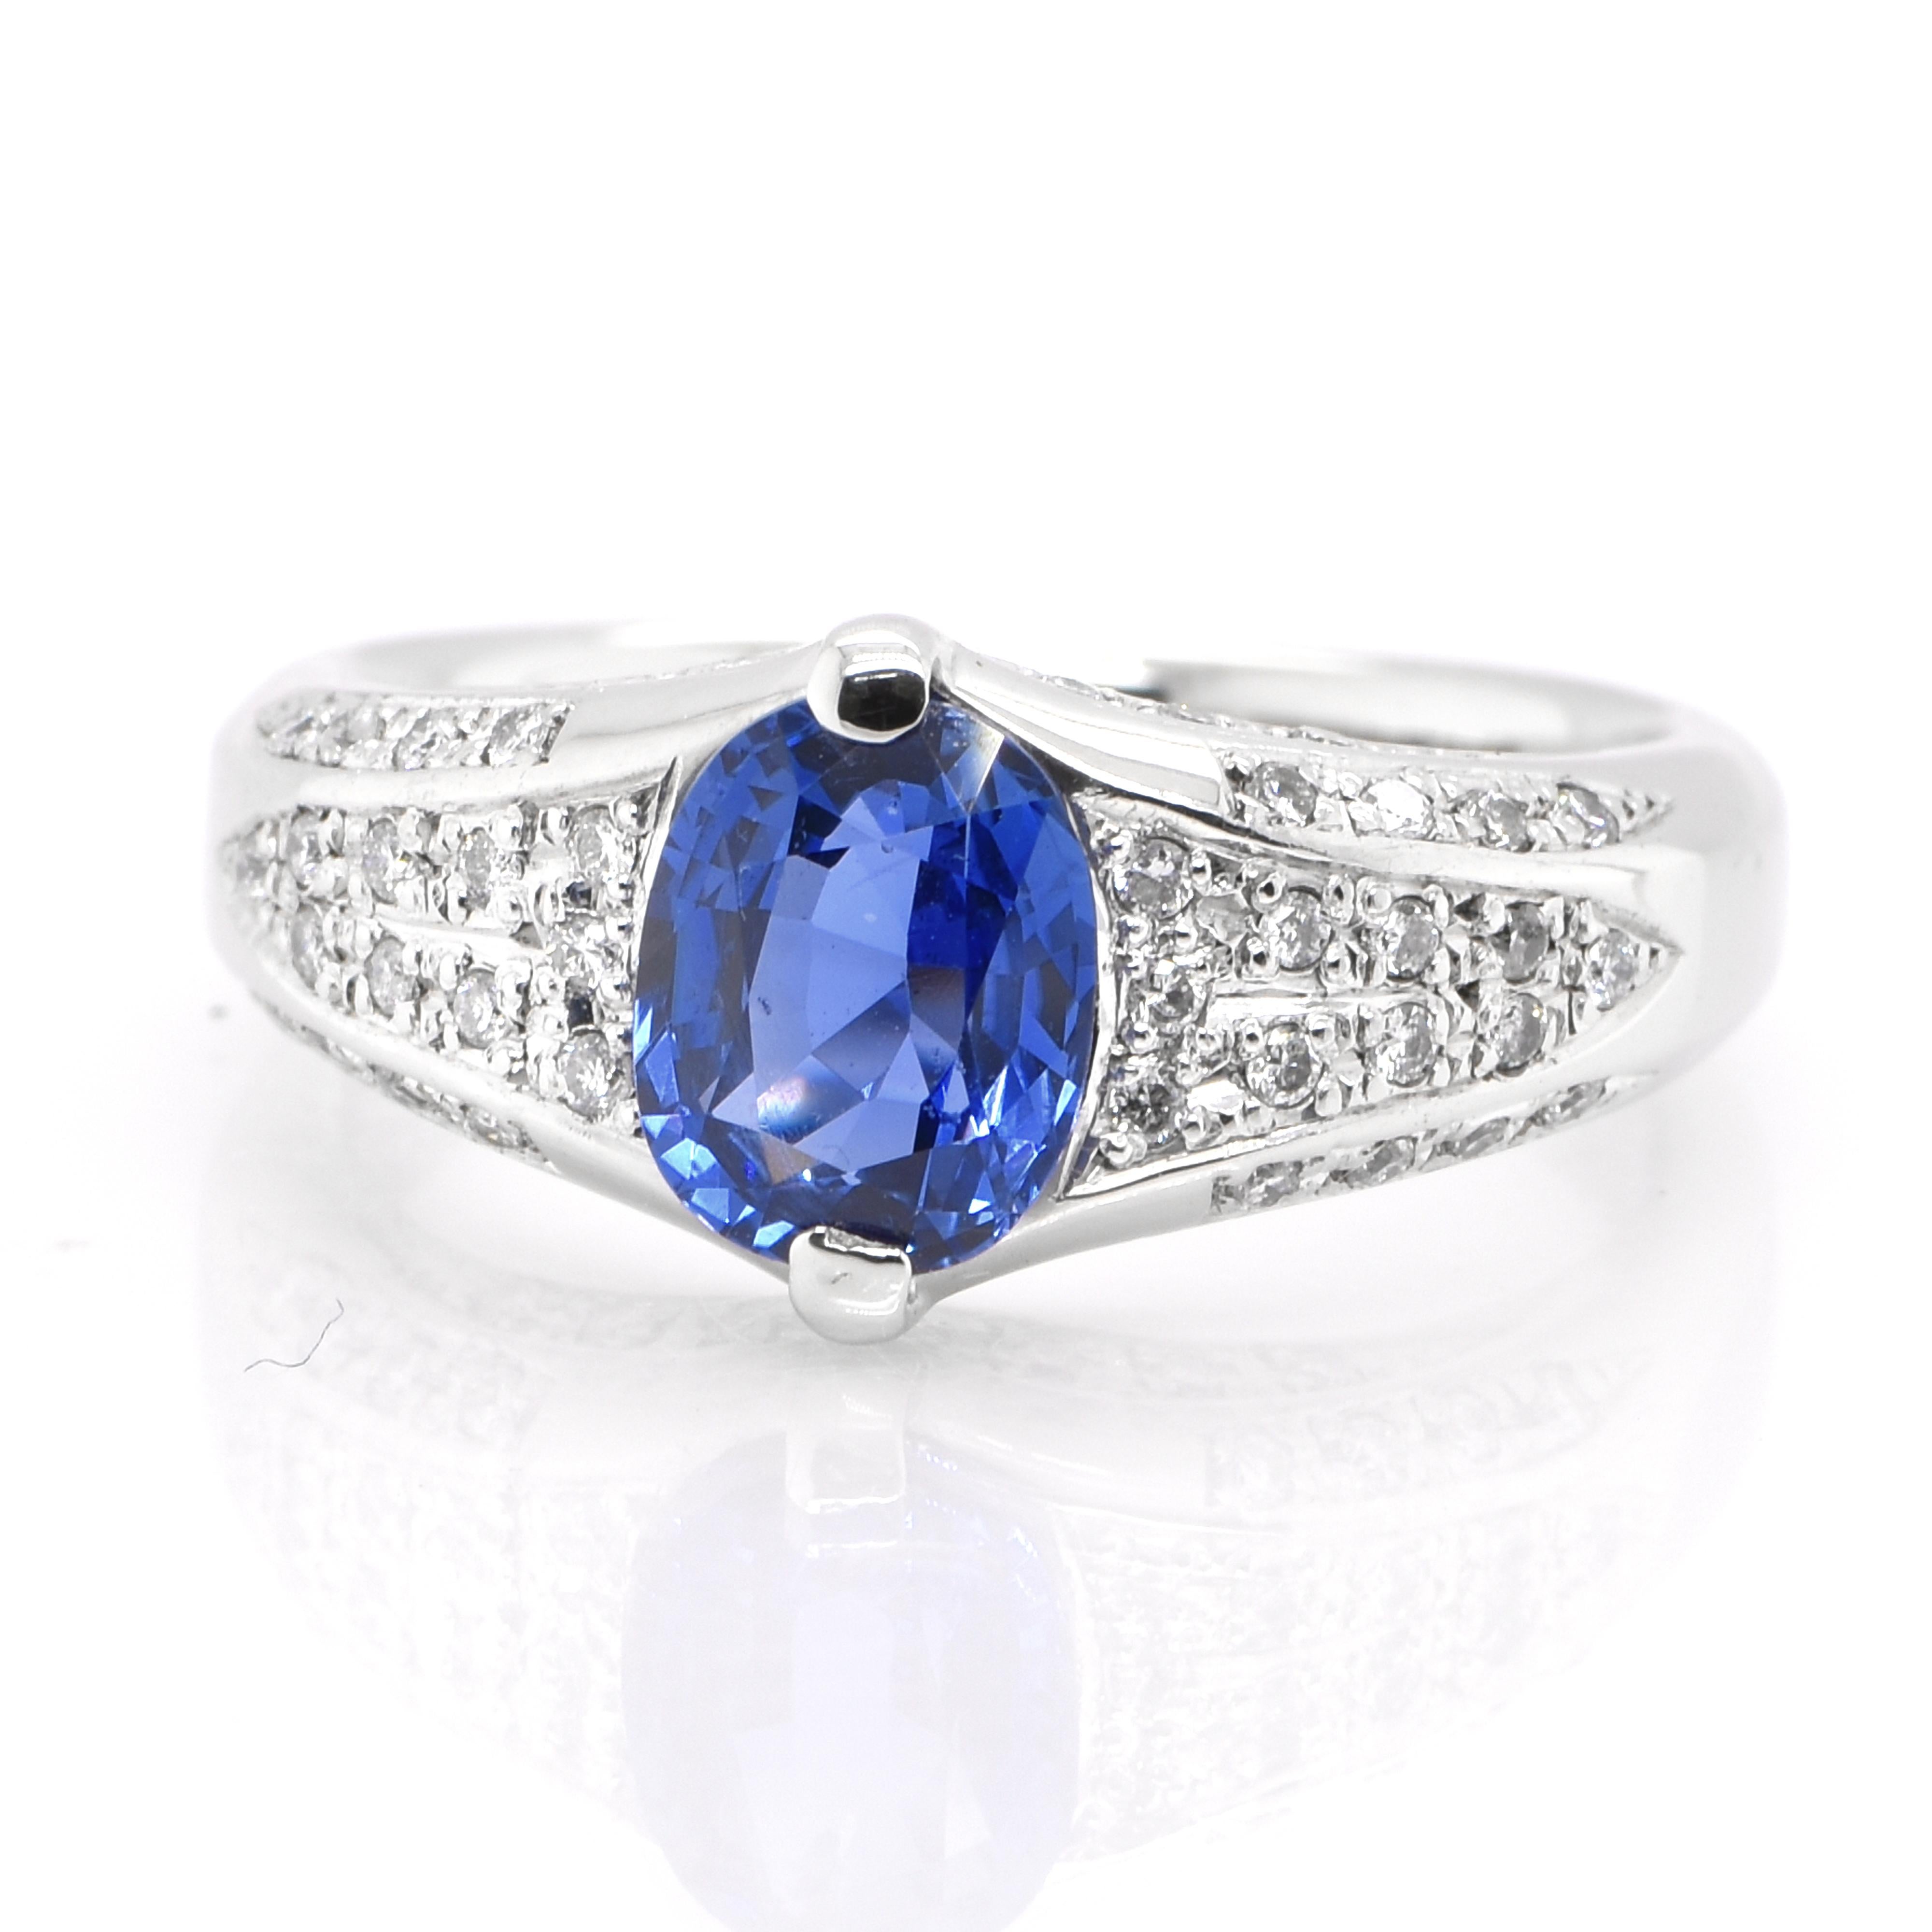 A beautiful ring featuring GIA Certified 1.44 Carat Natural No Heat, Burmese Sapphire and 0.20 Carats Diamond Accents set in Platinum. Sapphires have extraordinary durability - they excel in hardness as well as toughness and durability making them